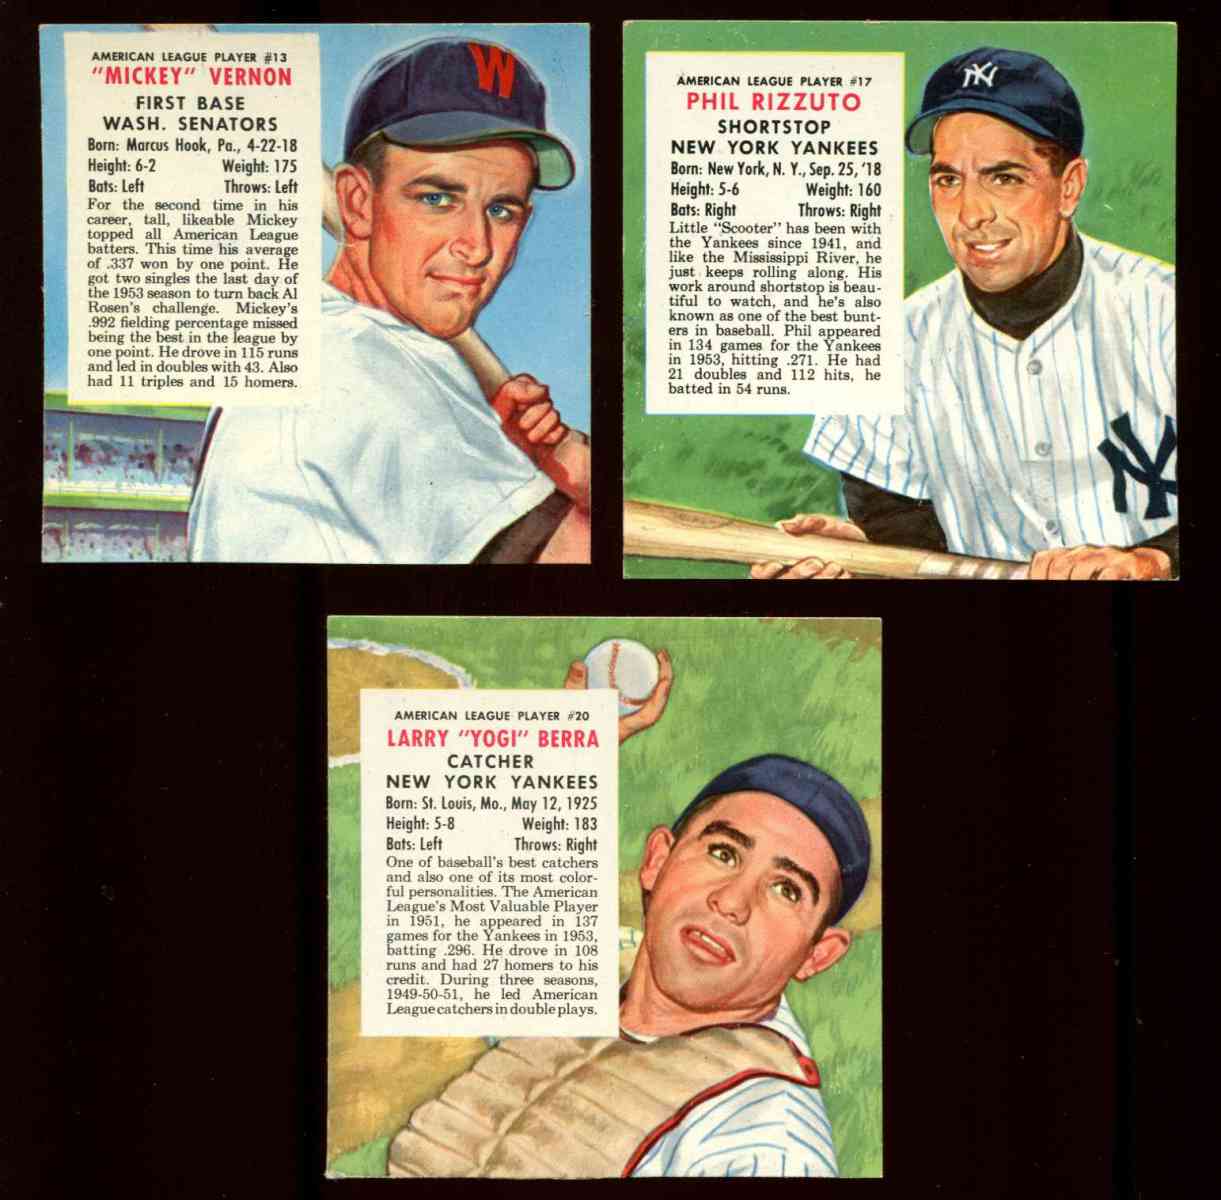 1954 Red Man #AL17 Phil Rizzuto (Yankees) Baseball cards value